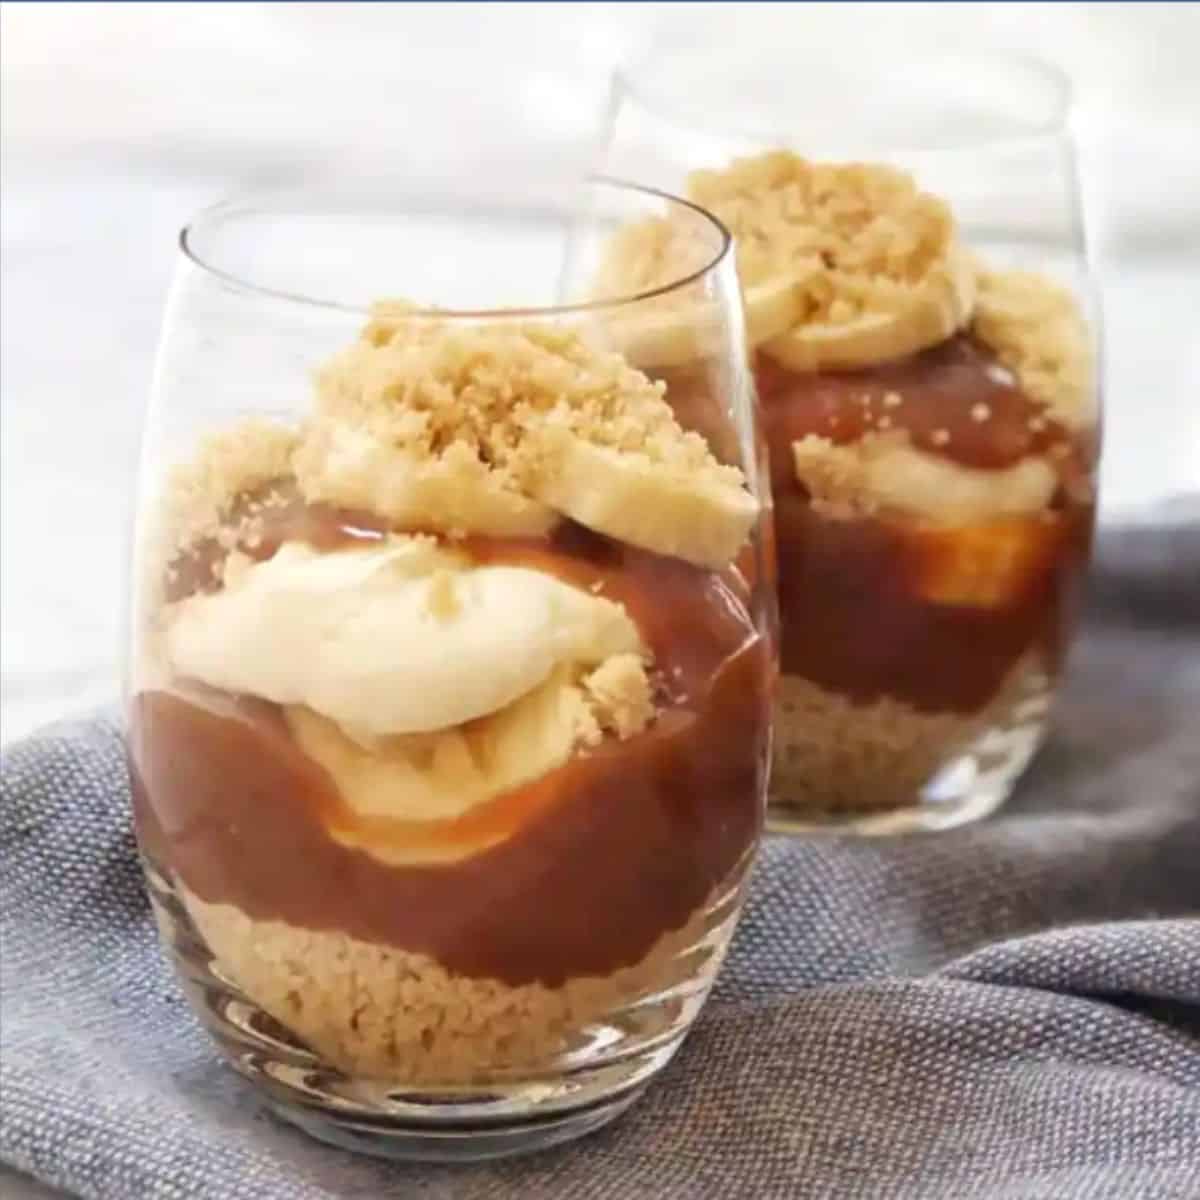 Bananas caramel and cookies in a cup.